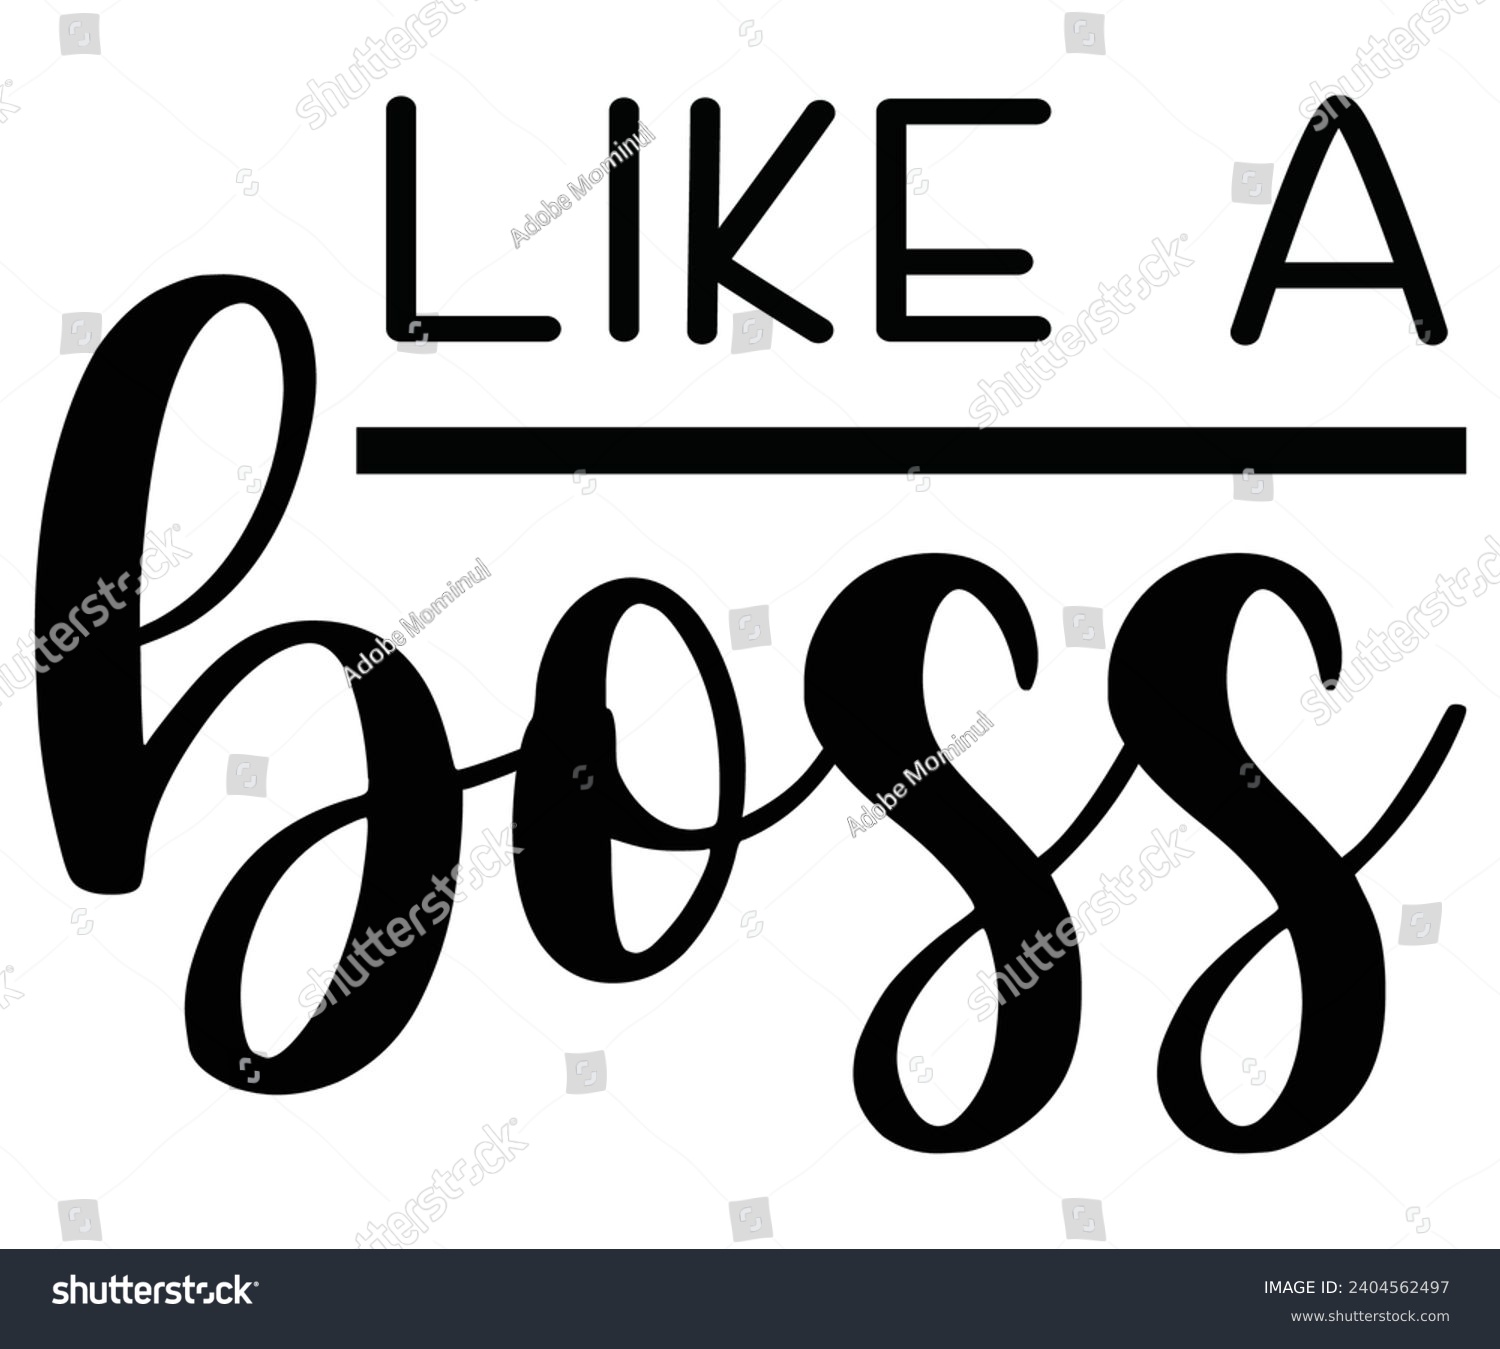 SVG of  Like A Boss Svg,Happy Boss Day svg,Boss Saying Quotes,Boss Day T-shirt,Gift for Boss,Great Jobs,Happy Bosses Day t-shirt,Girl Boss Shirt,Motivational Boss,Cut File,Circut And Silhouette,Commercial  svg